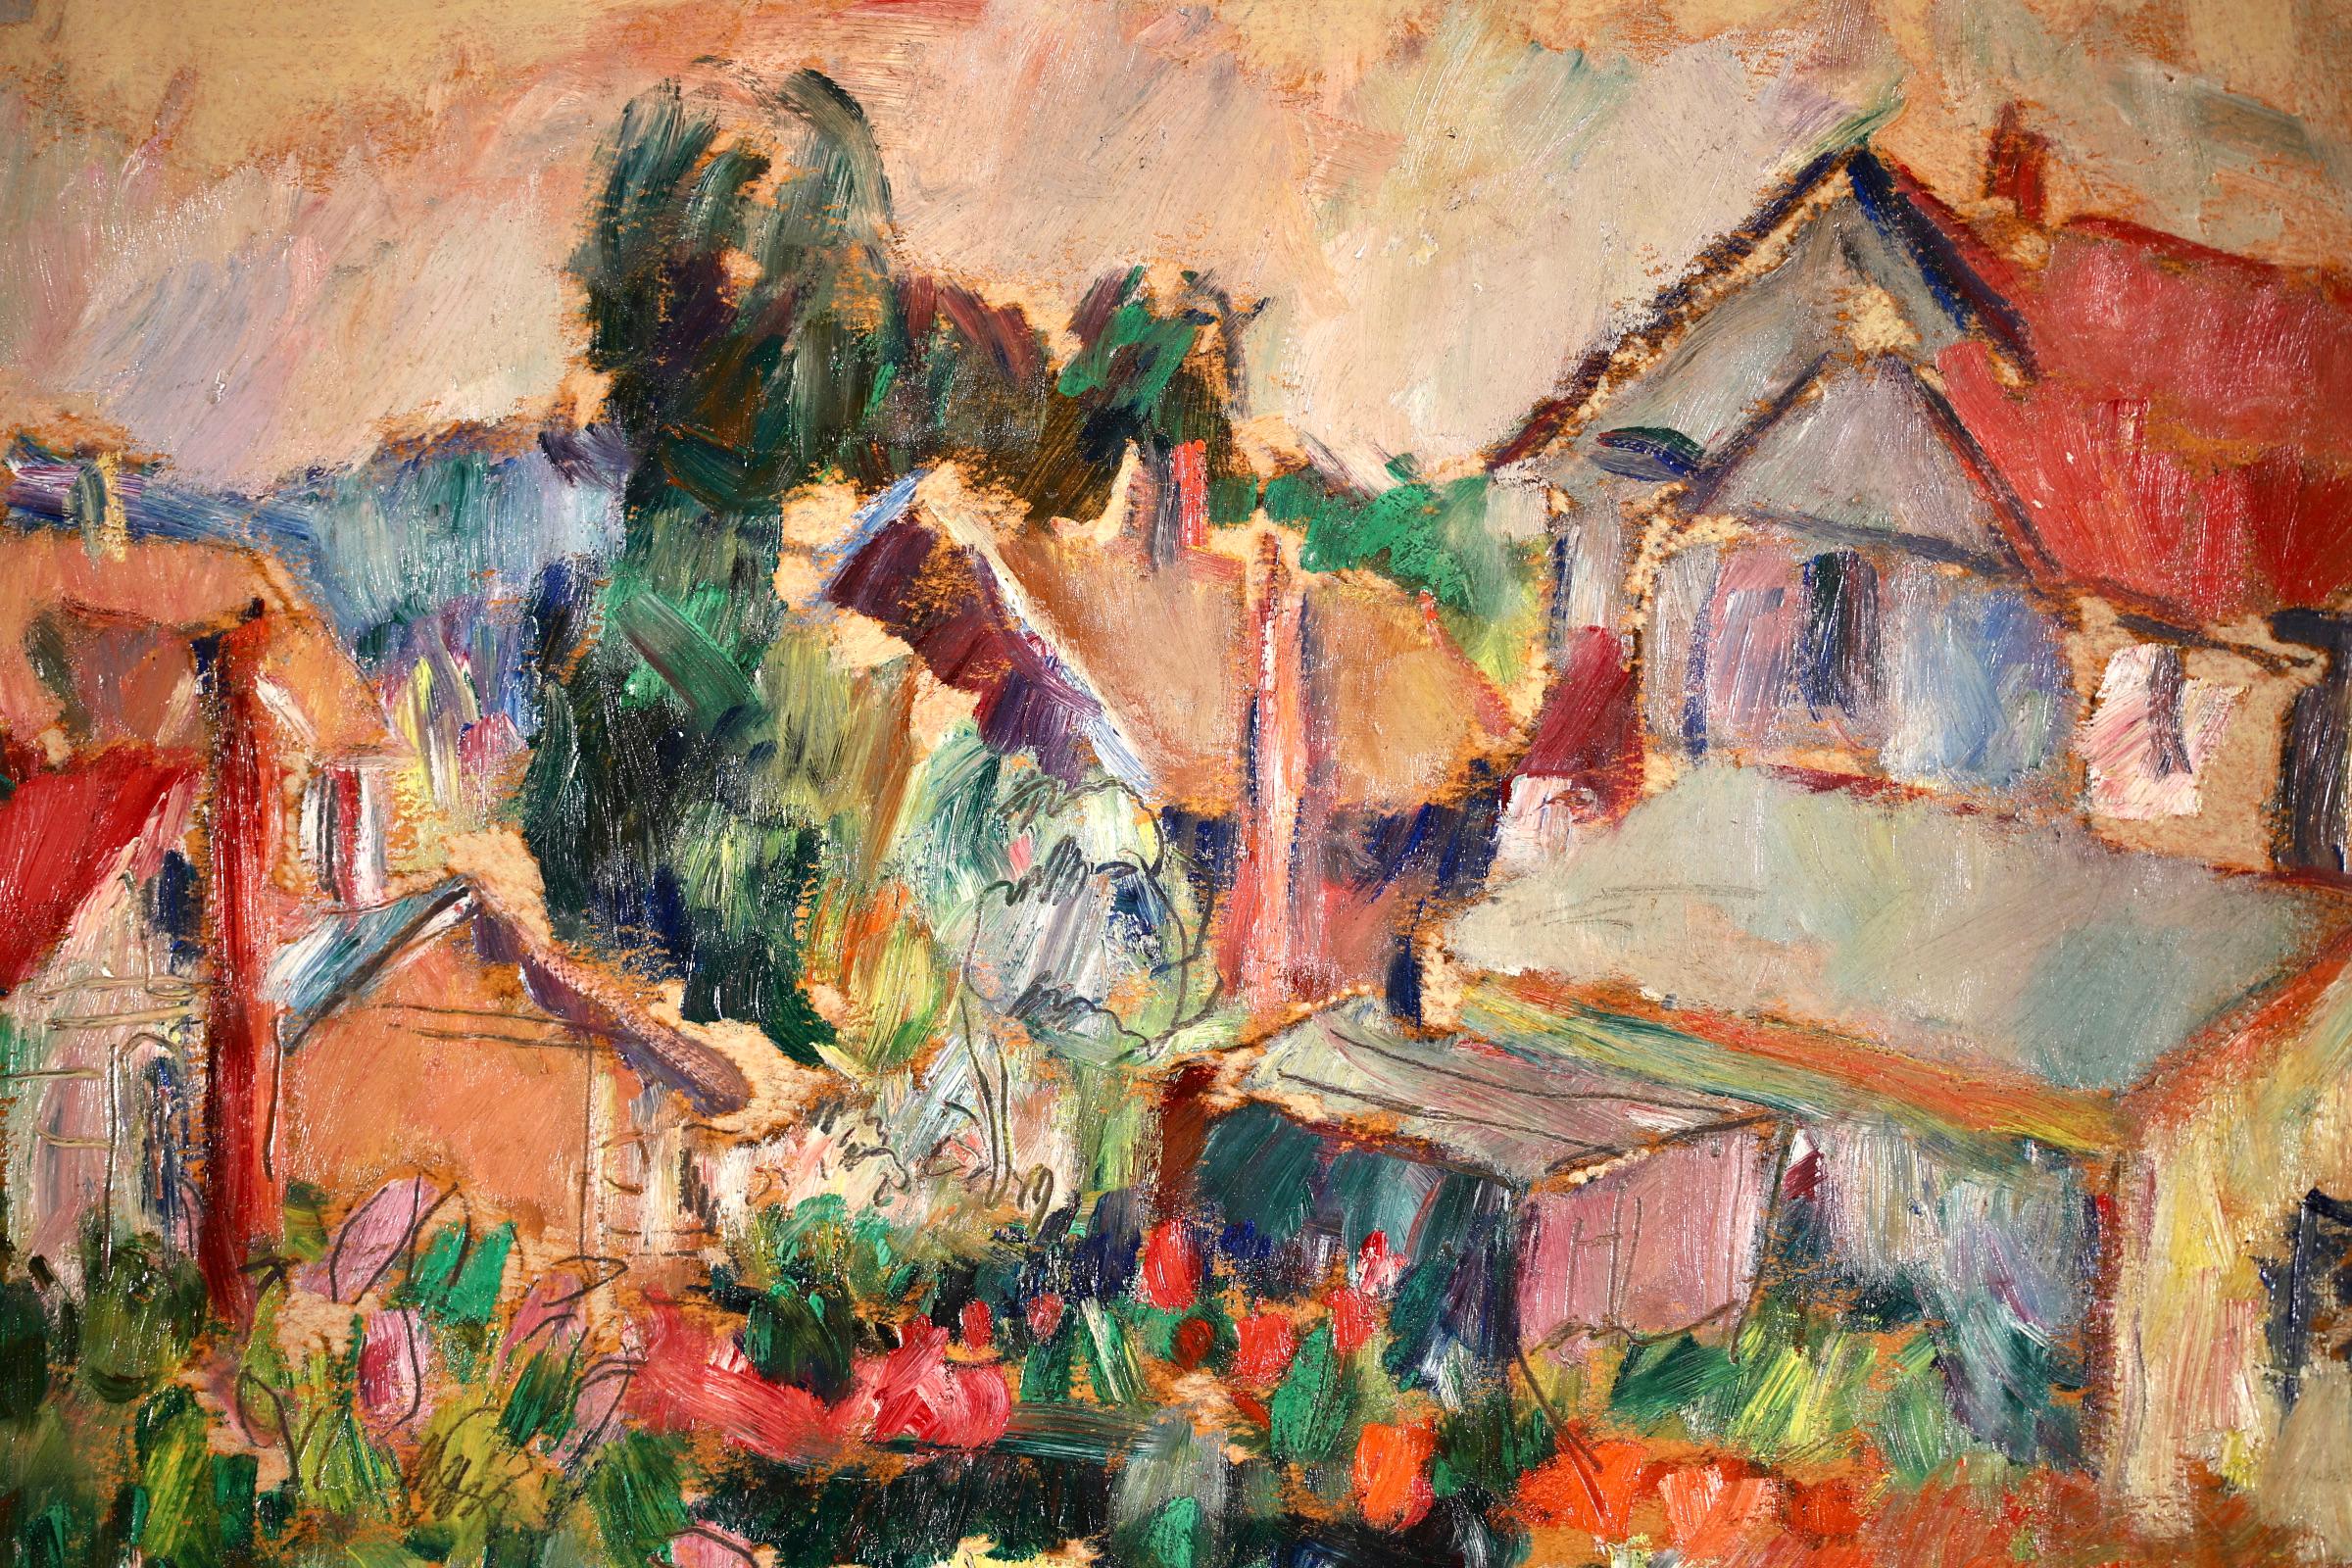 The Garden - 20th Century Oil, Cottages in Village Landscape by Abram Manevich - Post-Impressionist Painting by Abram Anshelevich Manevich